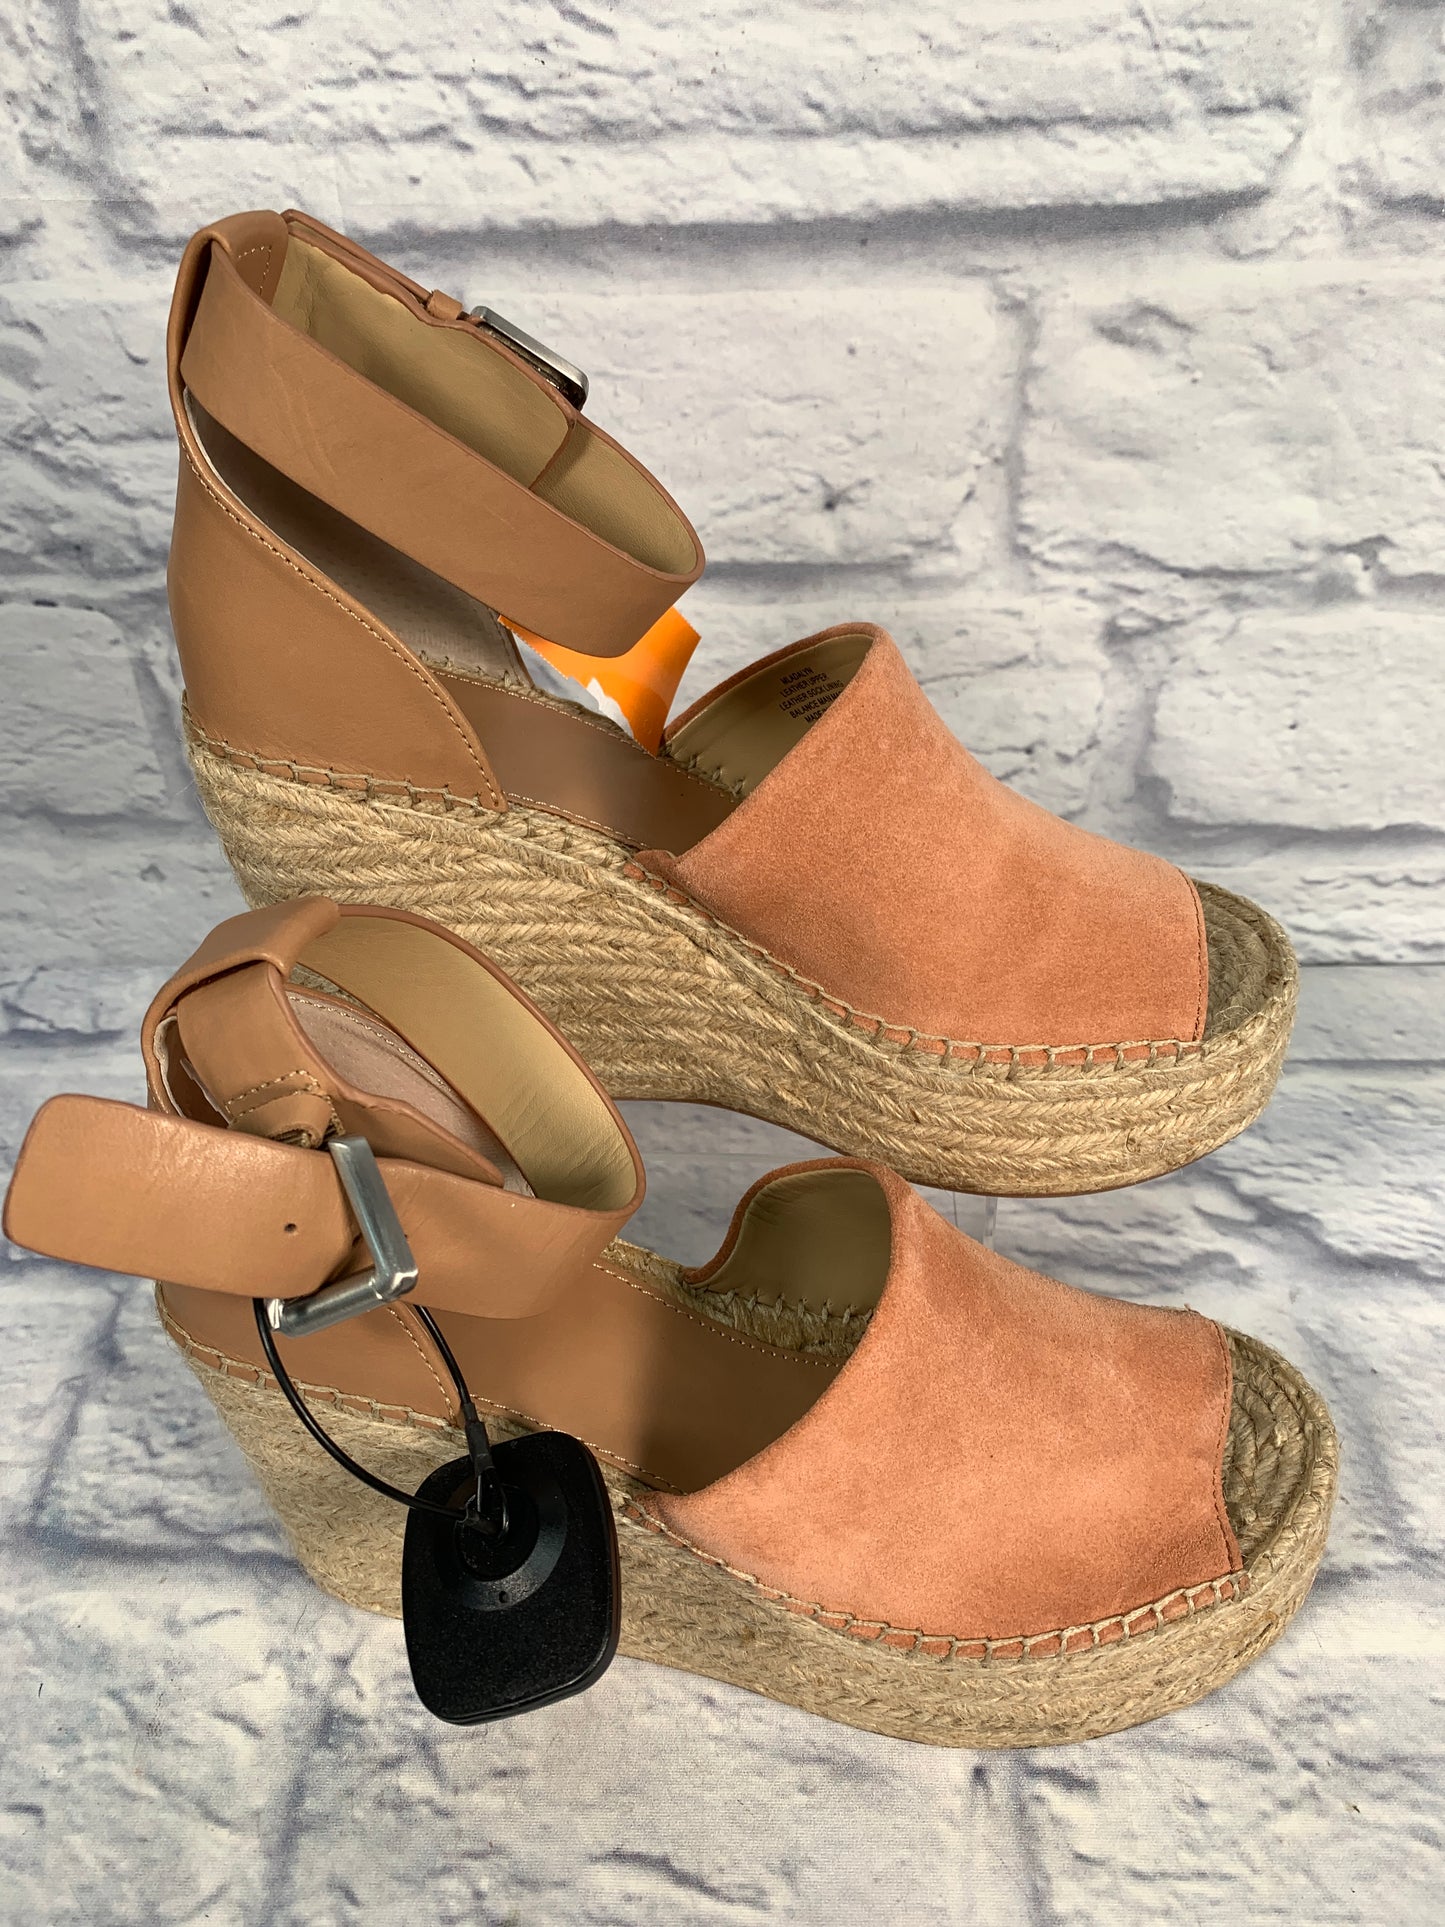 Sandals Heels Wedge By Marc Fisher  Size: 9